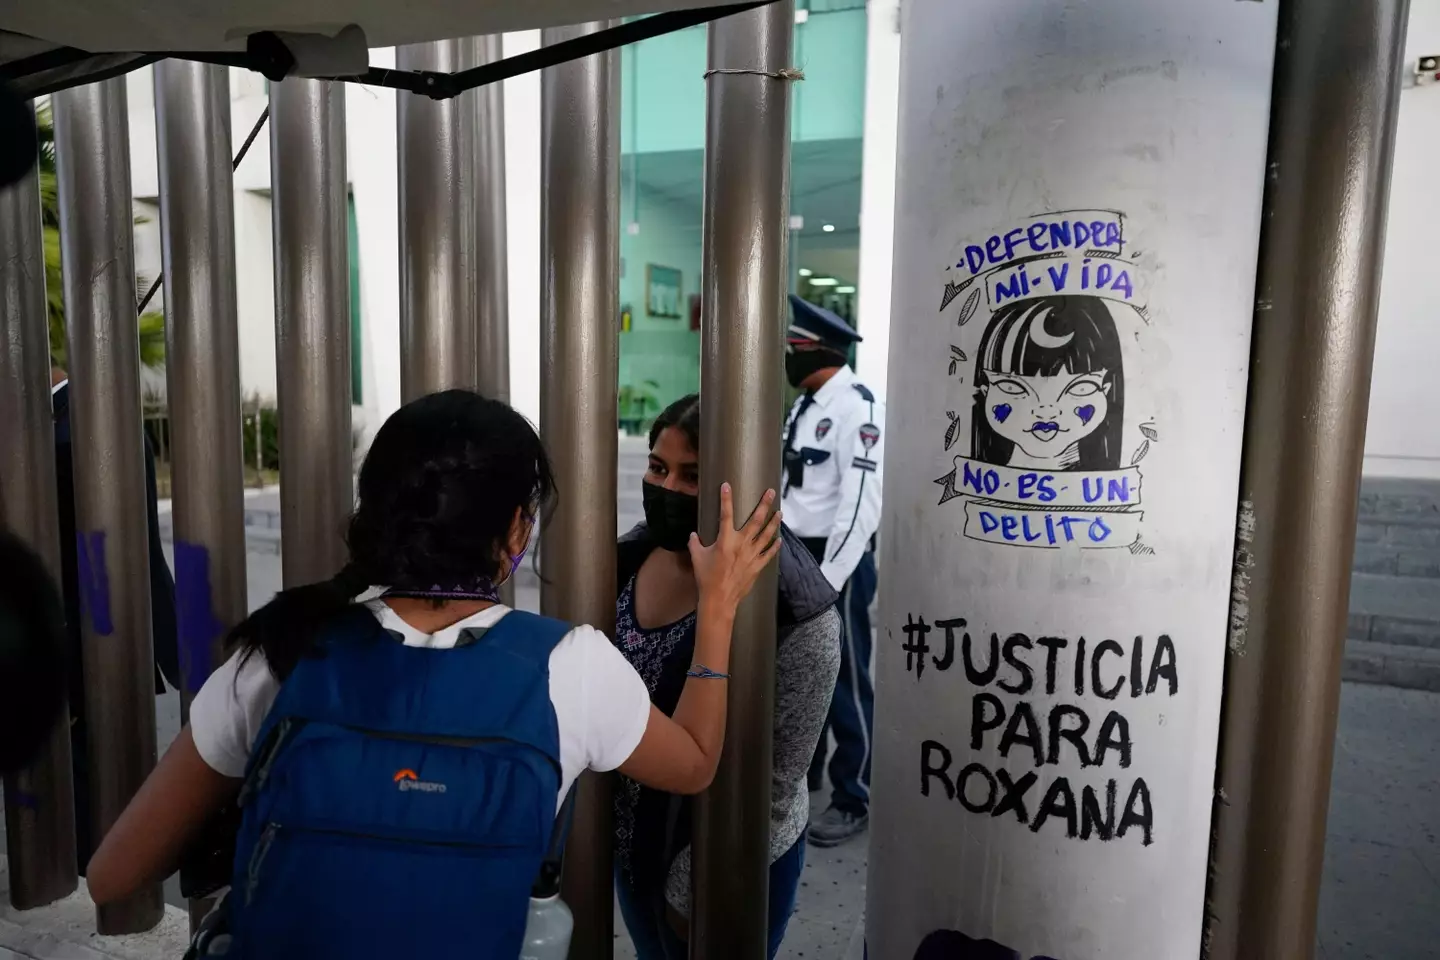 The sentencing of Roxana Ruiz for killing a man while he was raping her sparked protests in Mexico.